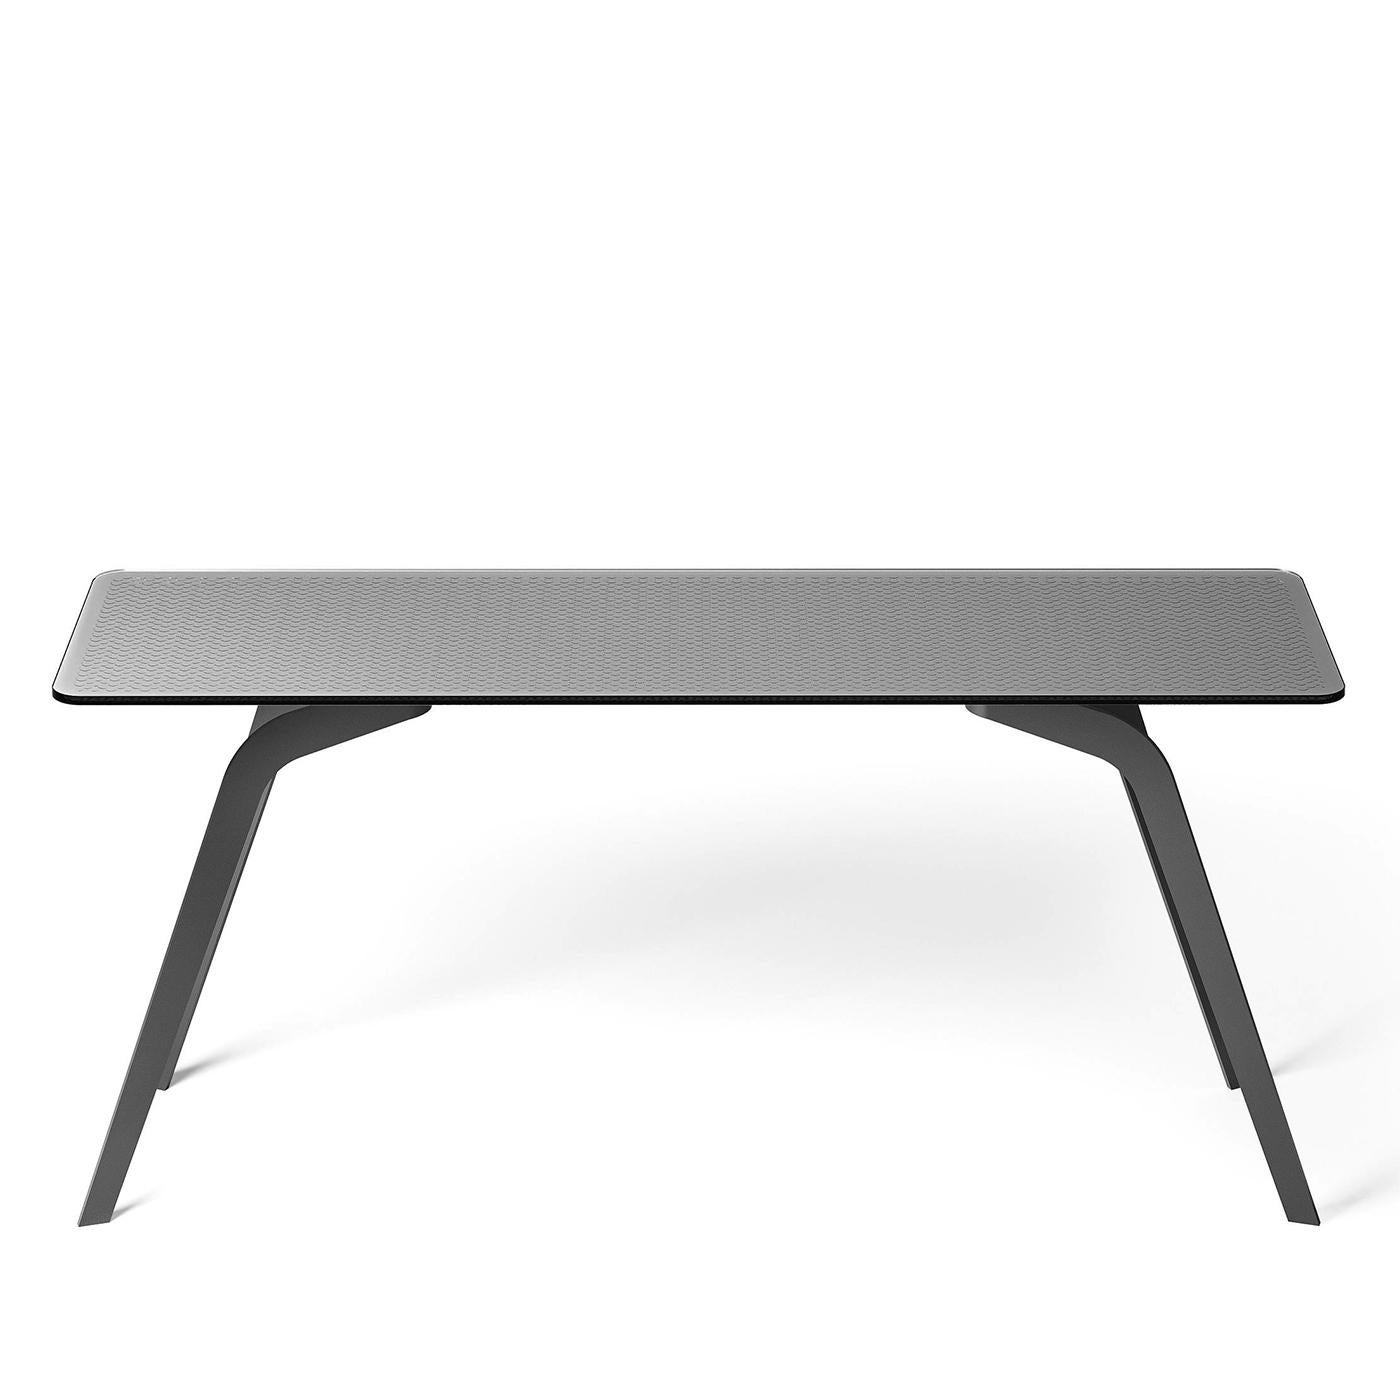 Console table lima grey with tempered glass top,
12 mm thickness, back lacquered glass top with grey 
Metallic paint. With metal base painted in dark grey finish.

